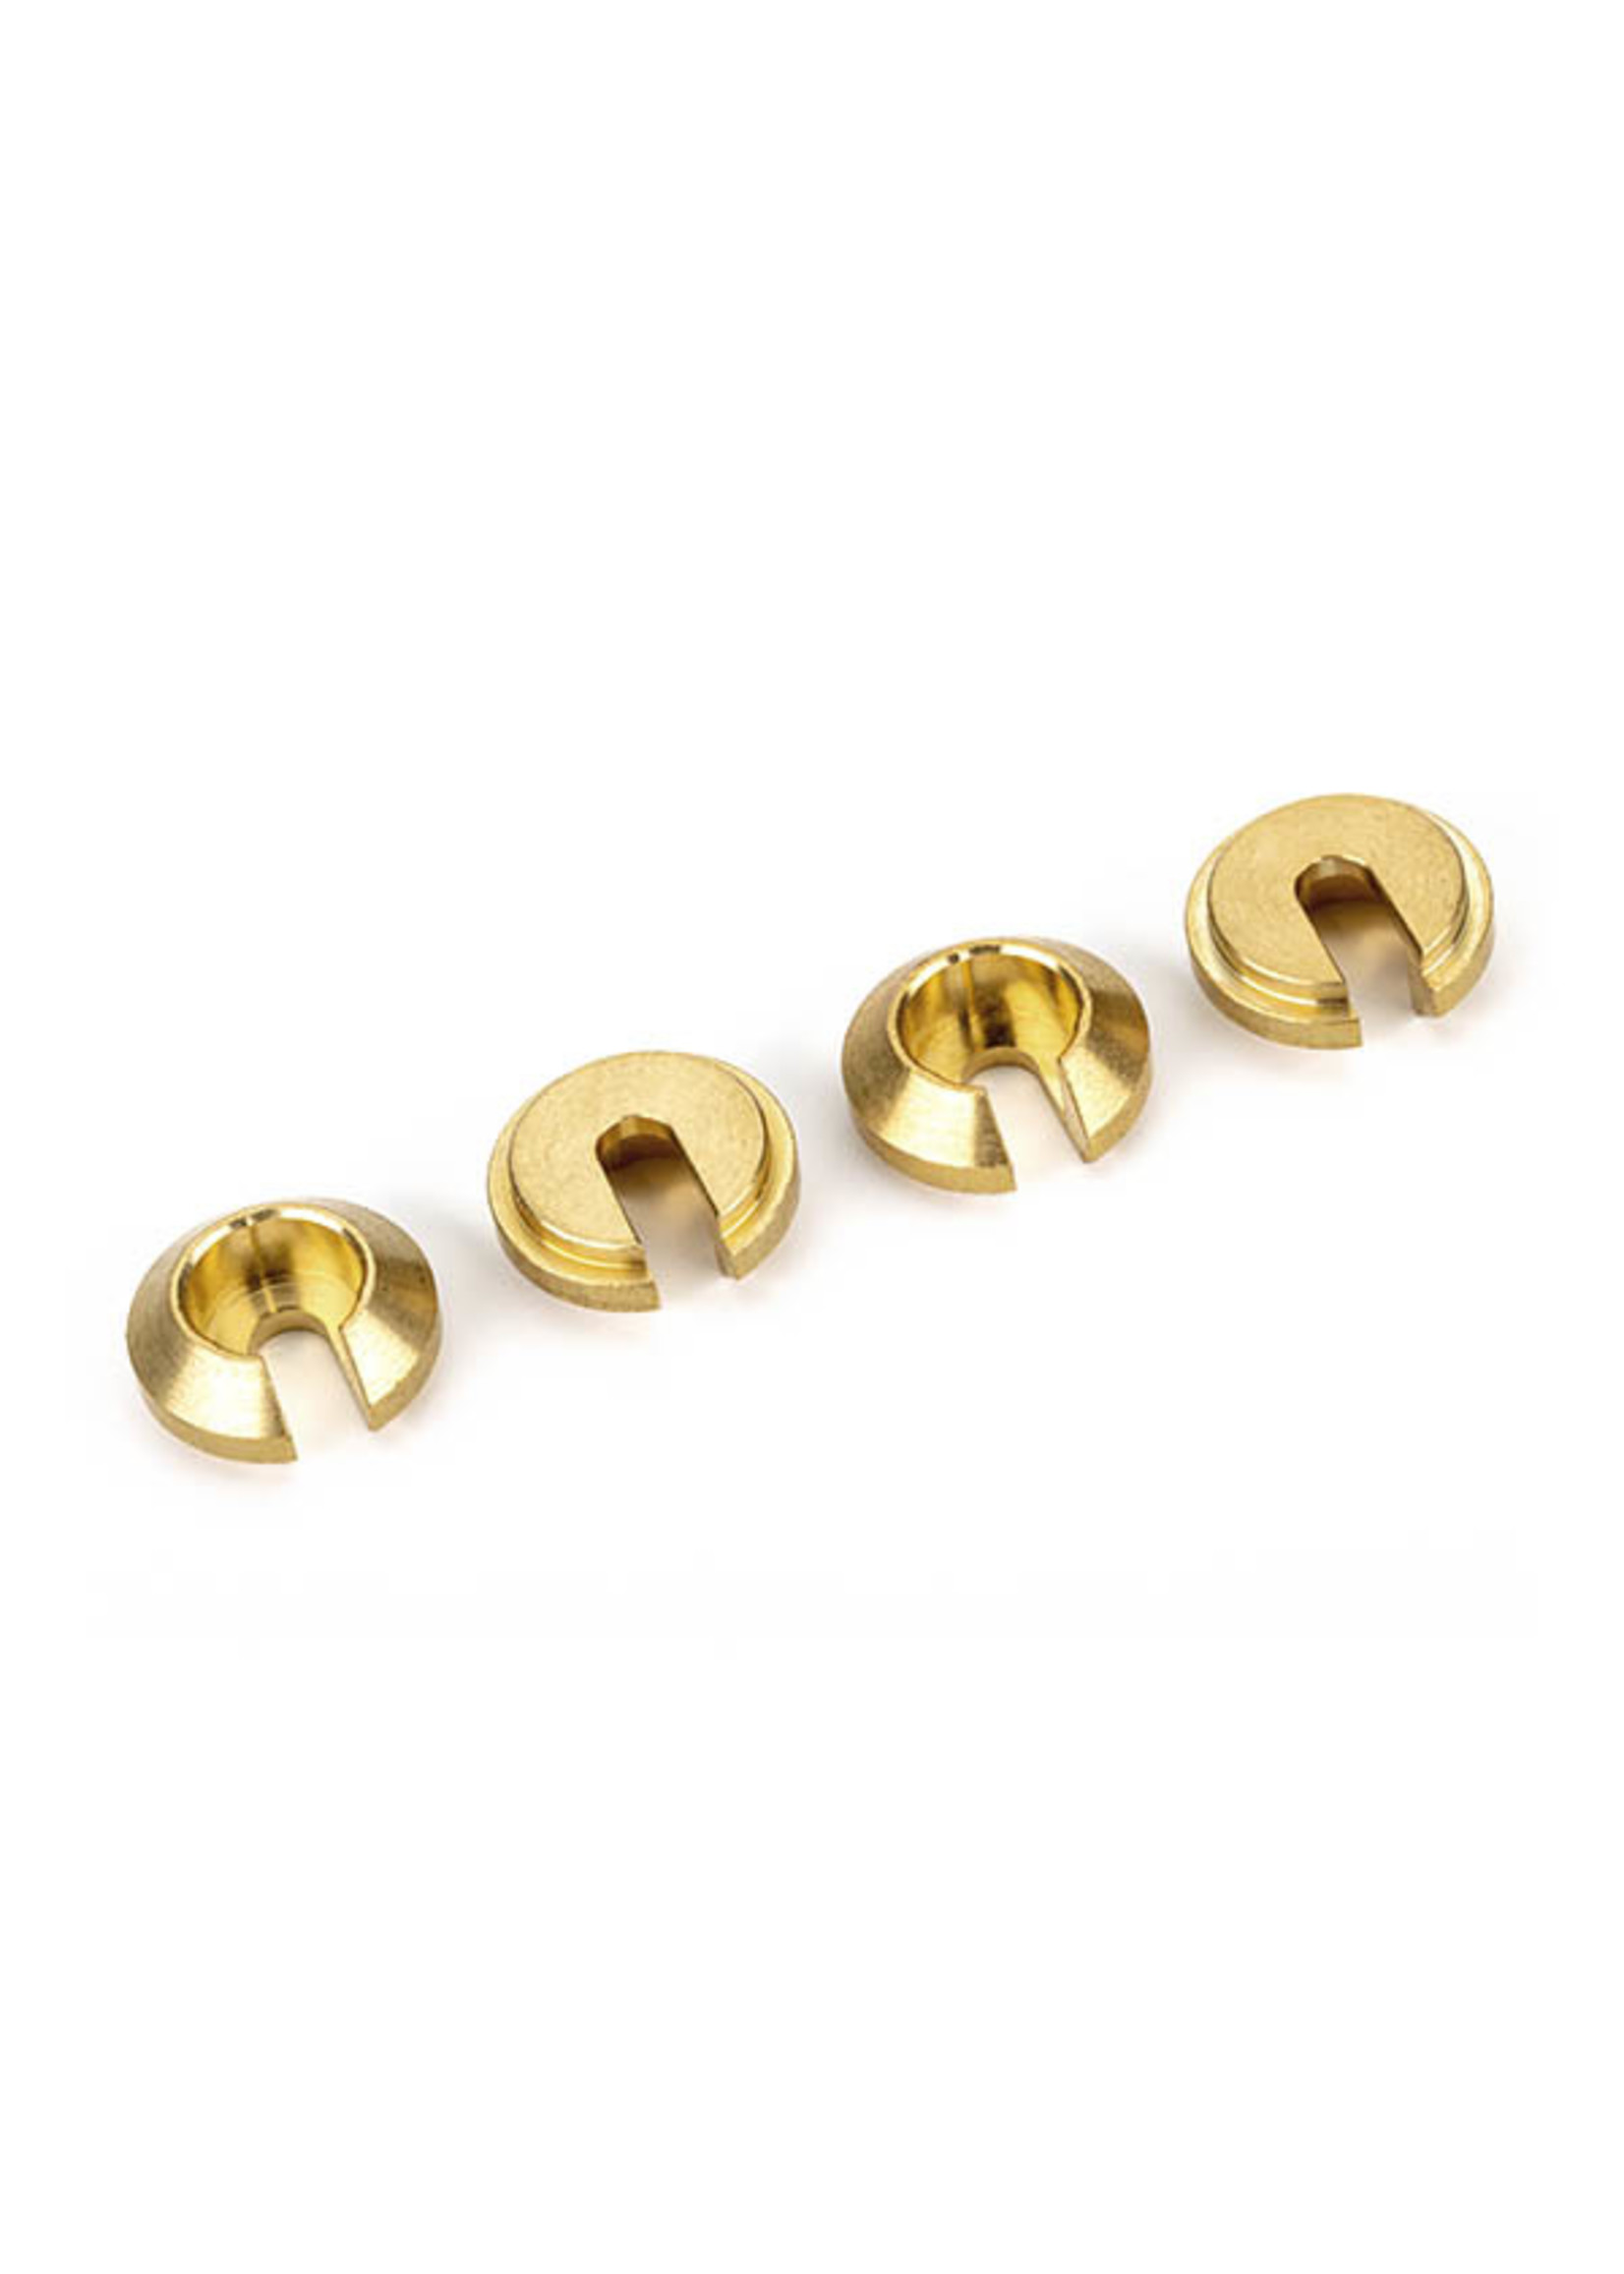 Traxxas 9761A - Lower Shock Retainers - Brass